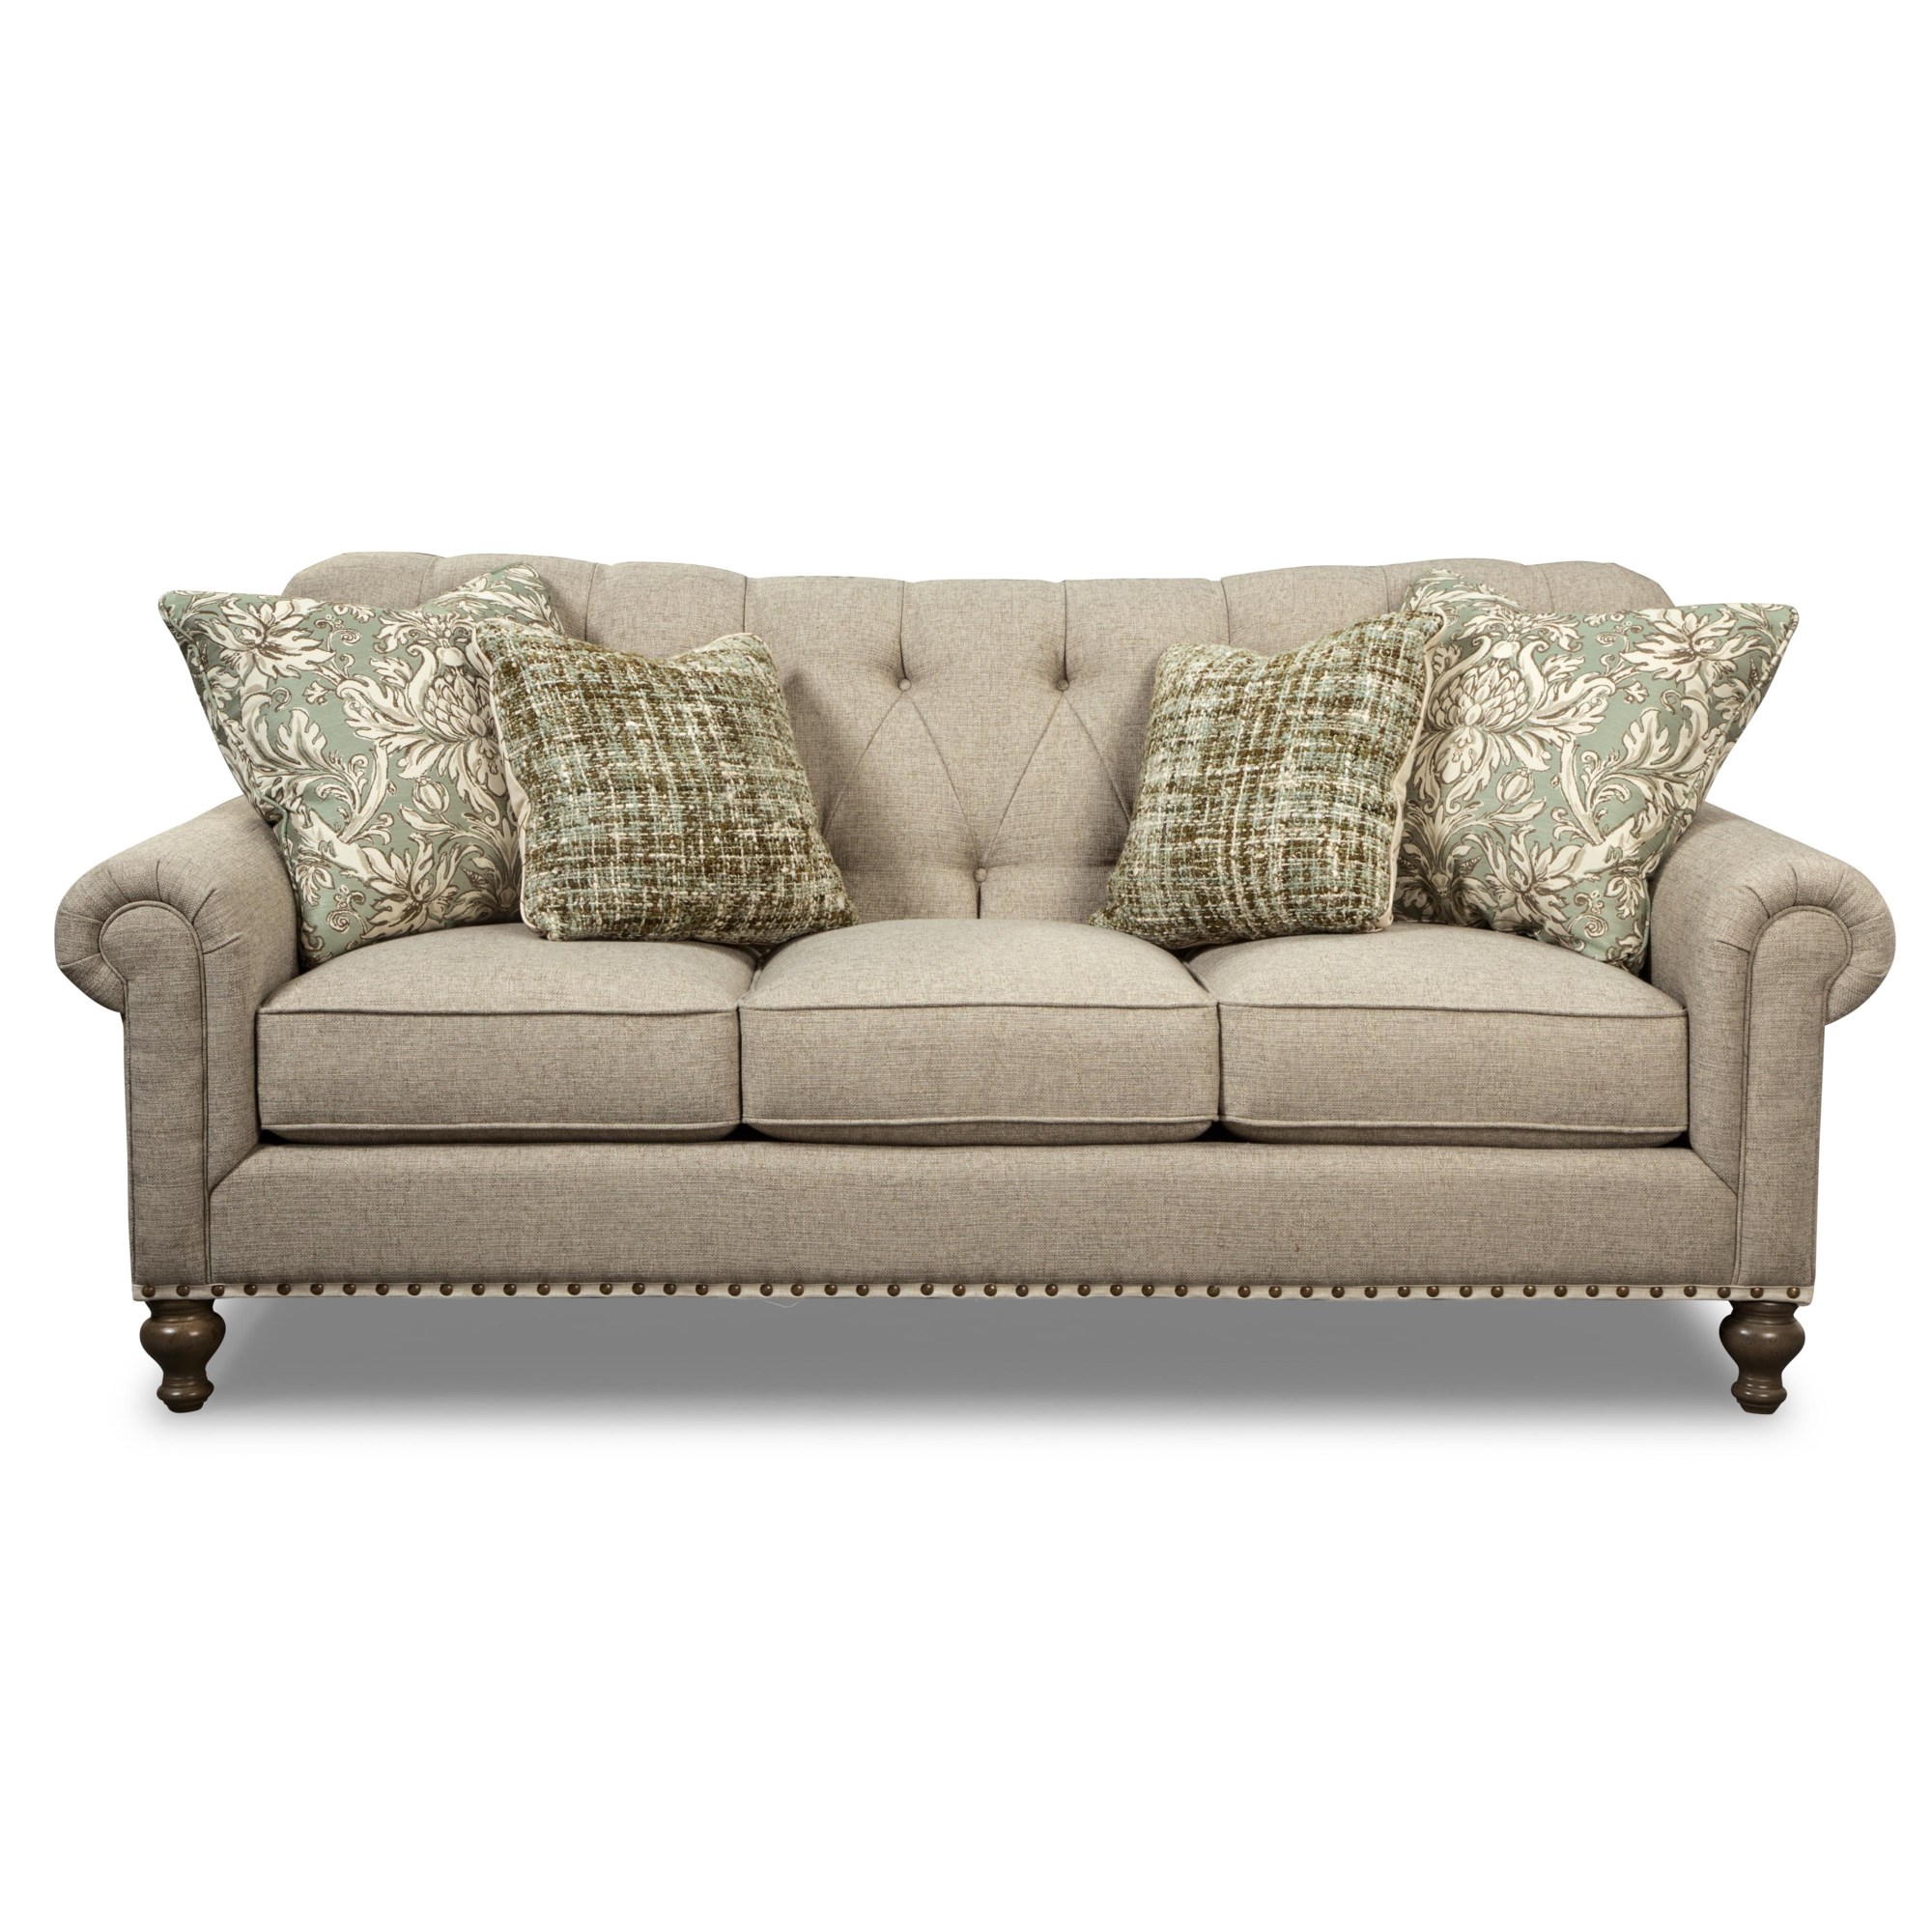 Home | Sofas Traditional by P754150BD Craftmaster - Nailheads Store Uph | Sofa Lagniappe Camelback Tufted Paula Deen PD754100 Stationary with